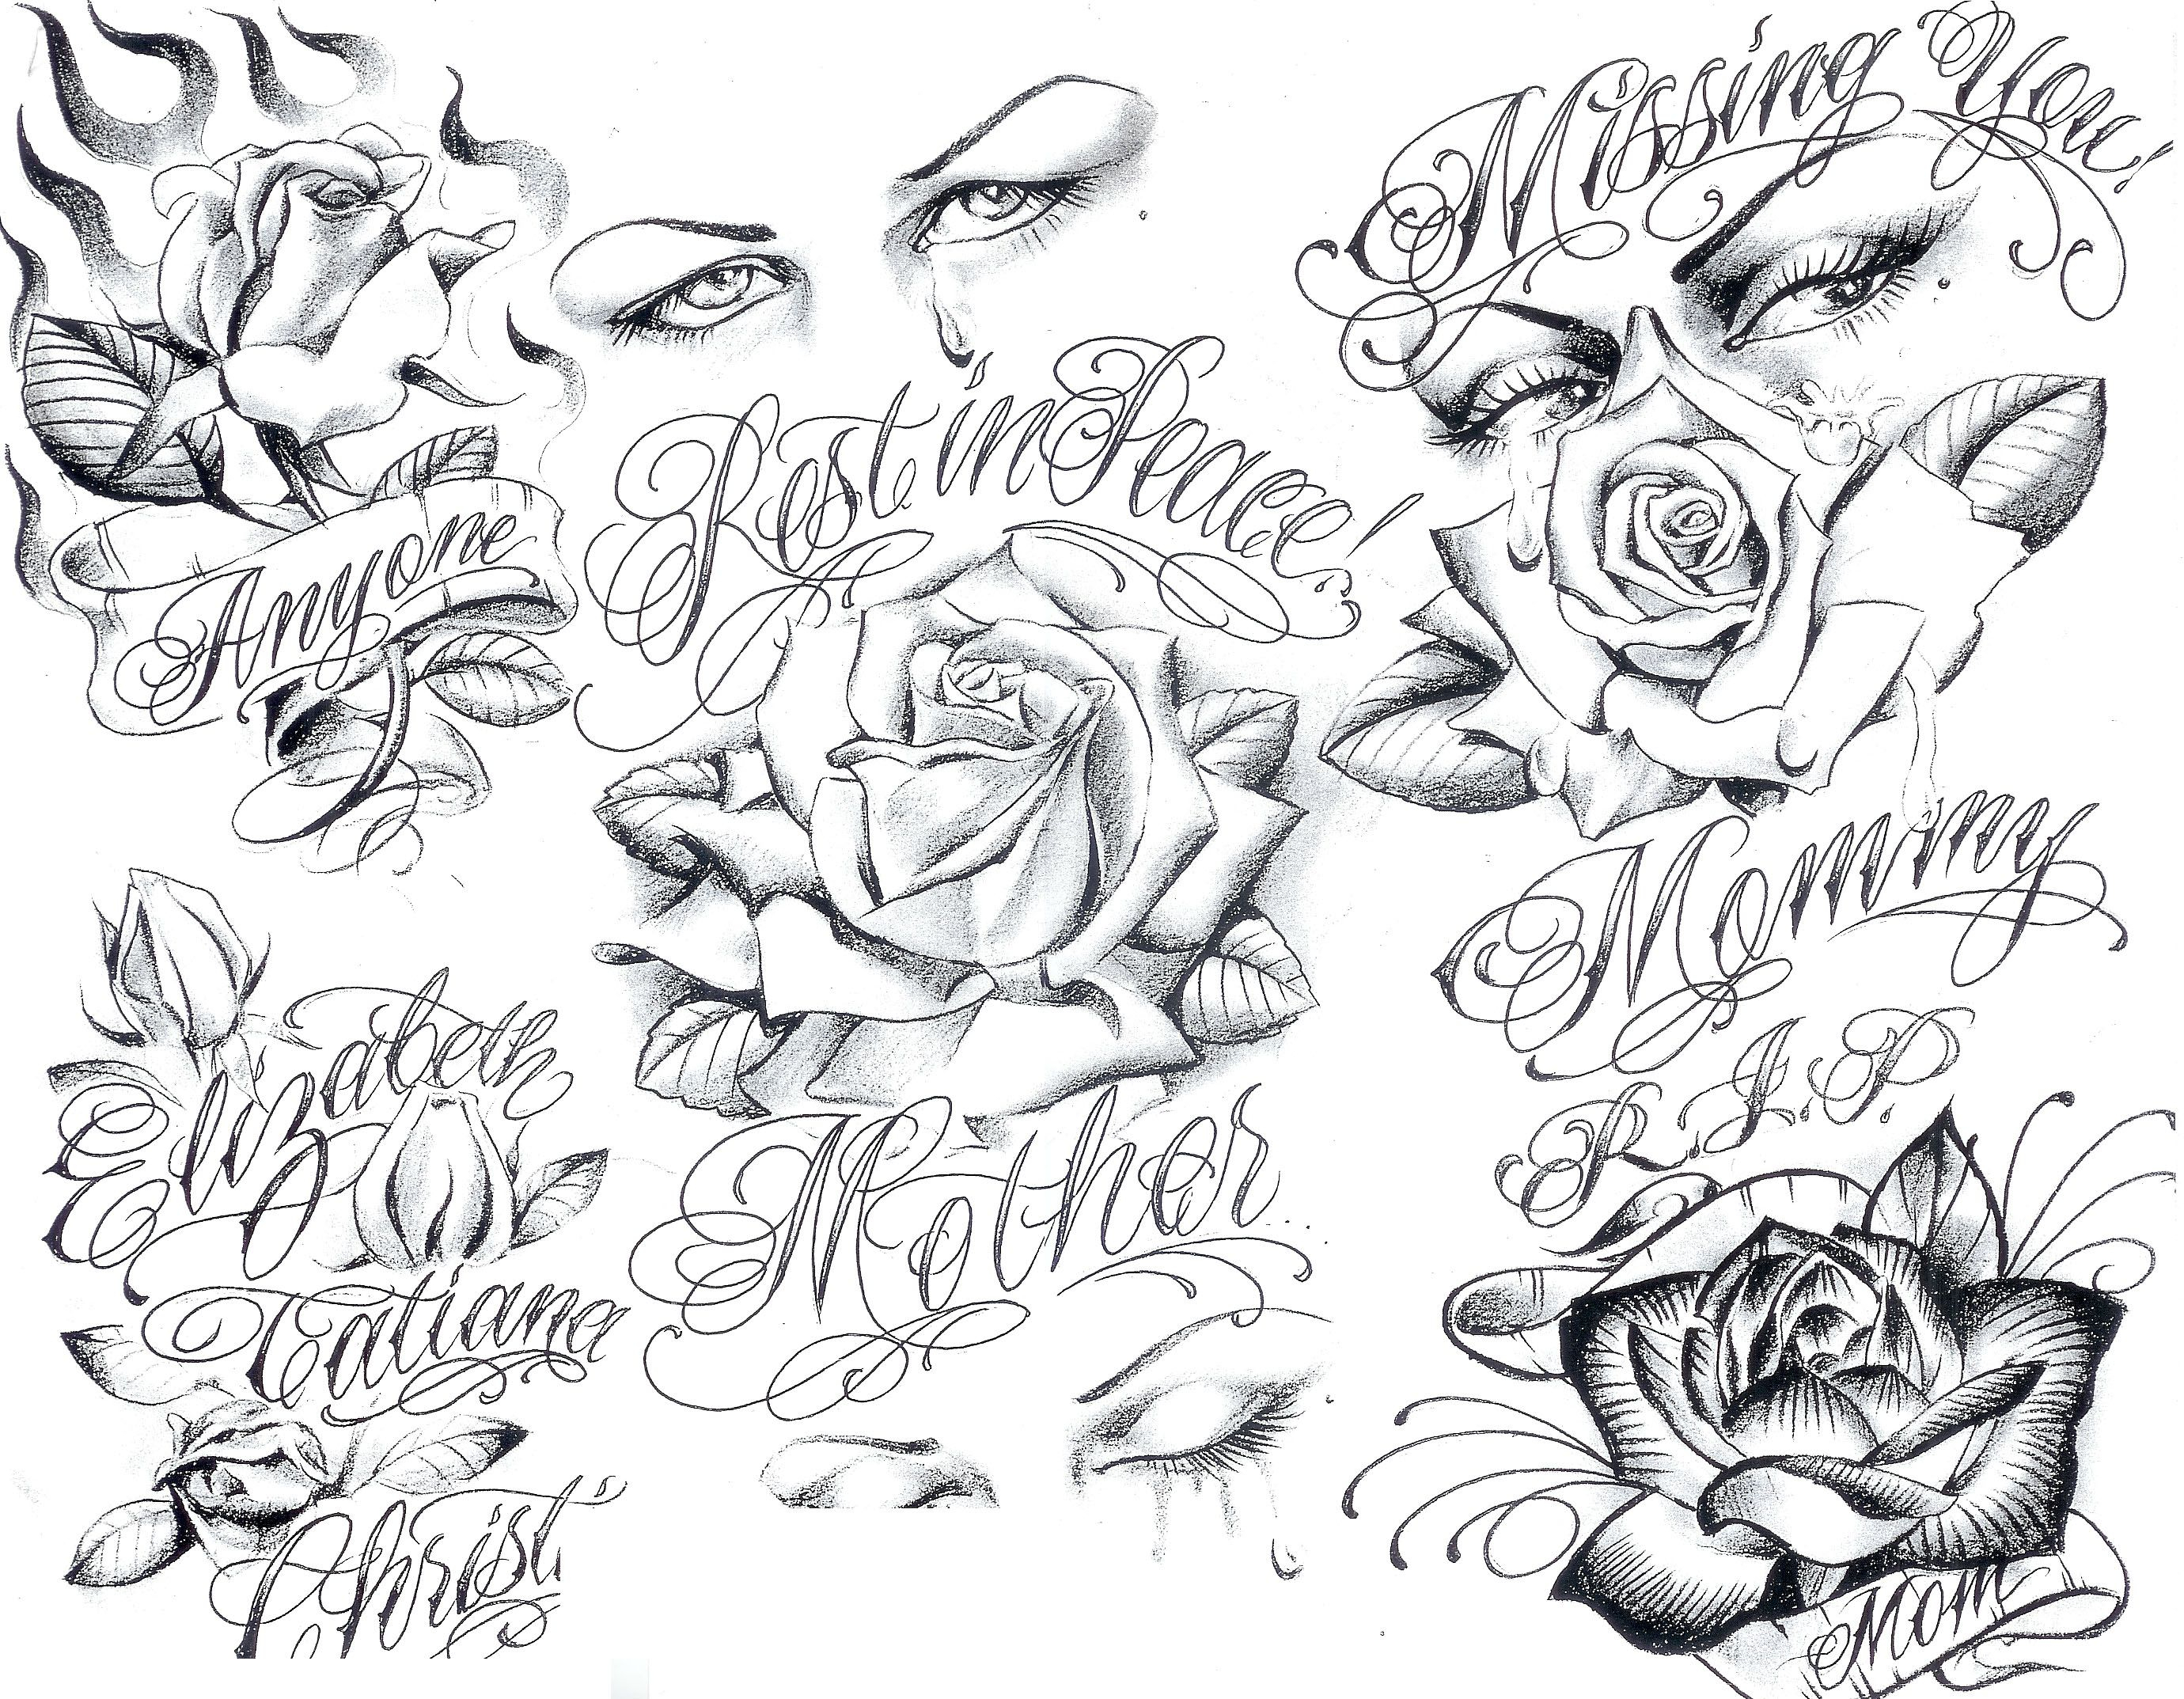 Art Gangster Tattoo Designs Tattoo Flash Boog intended for sizing 2760 X 2147